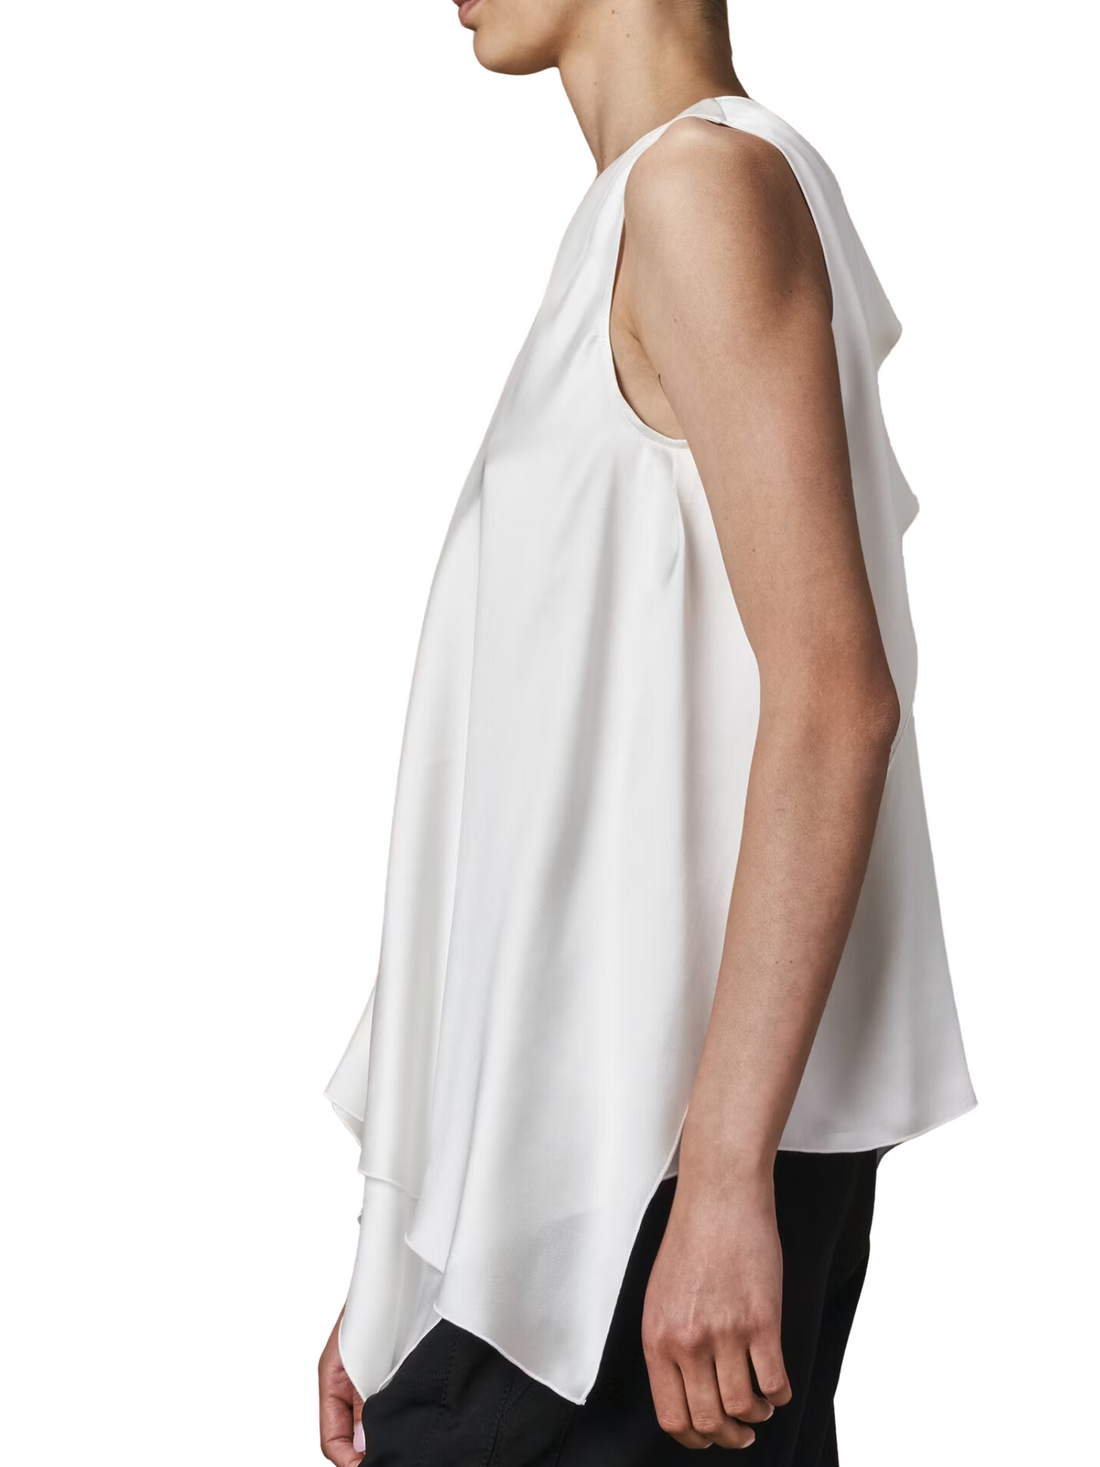 For Instance sleeveless silk ivory top with handkerchief hem from High Couture at Jessimara.com